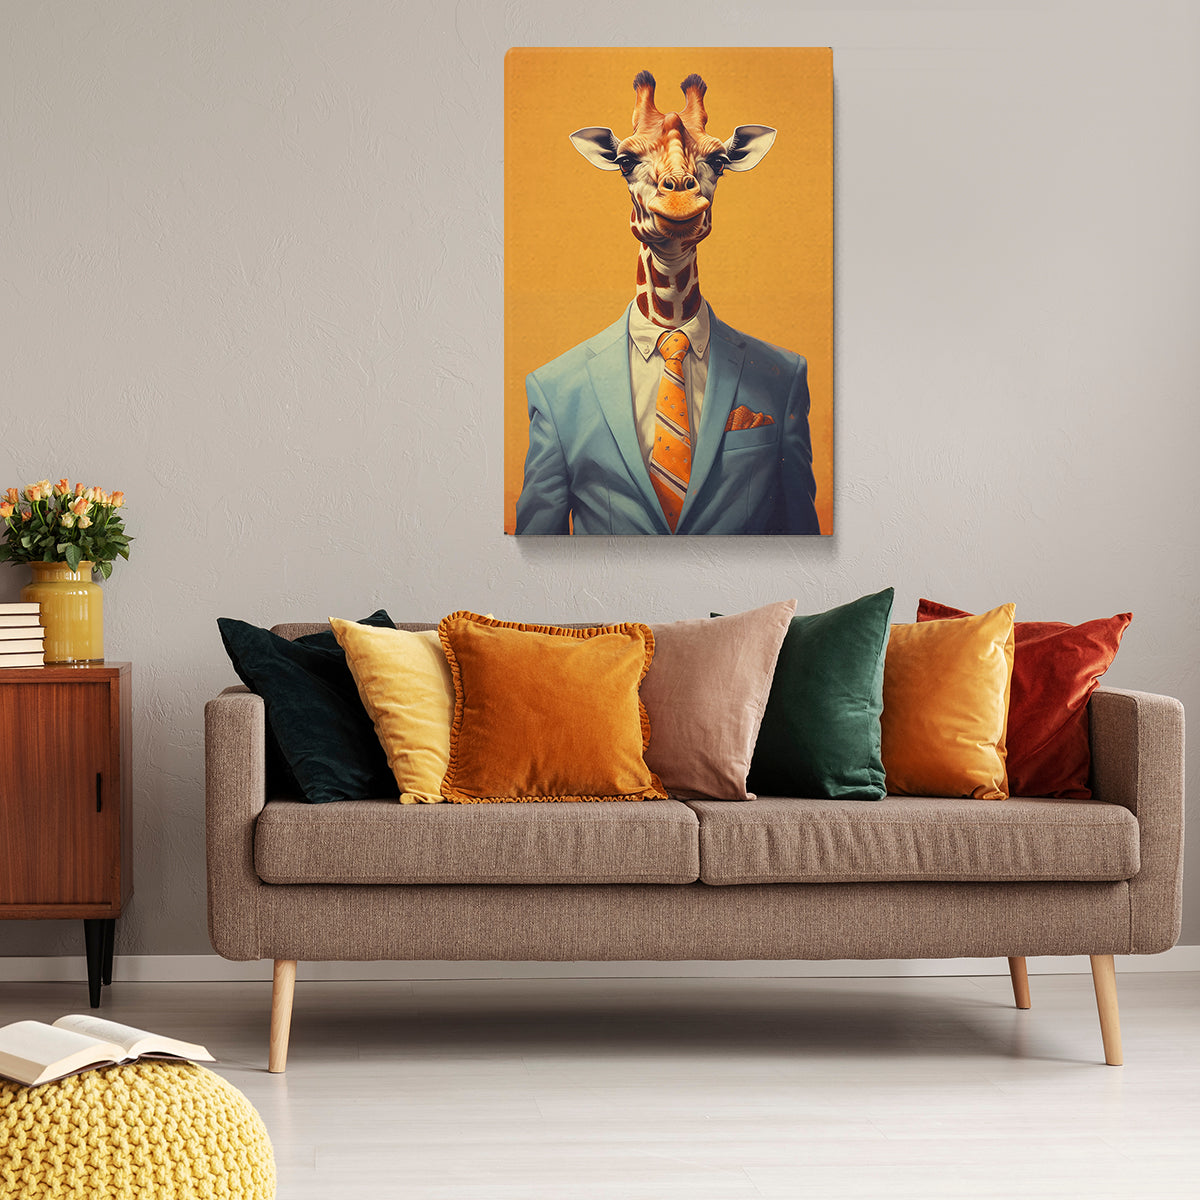 Giraffe in Blue Suit Canvas Print ArtLexy 1 Panel 16"x24" inches 